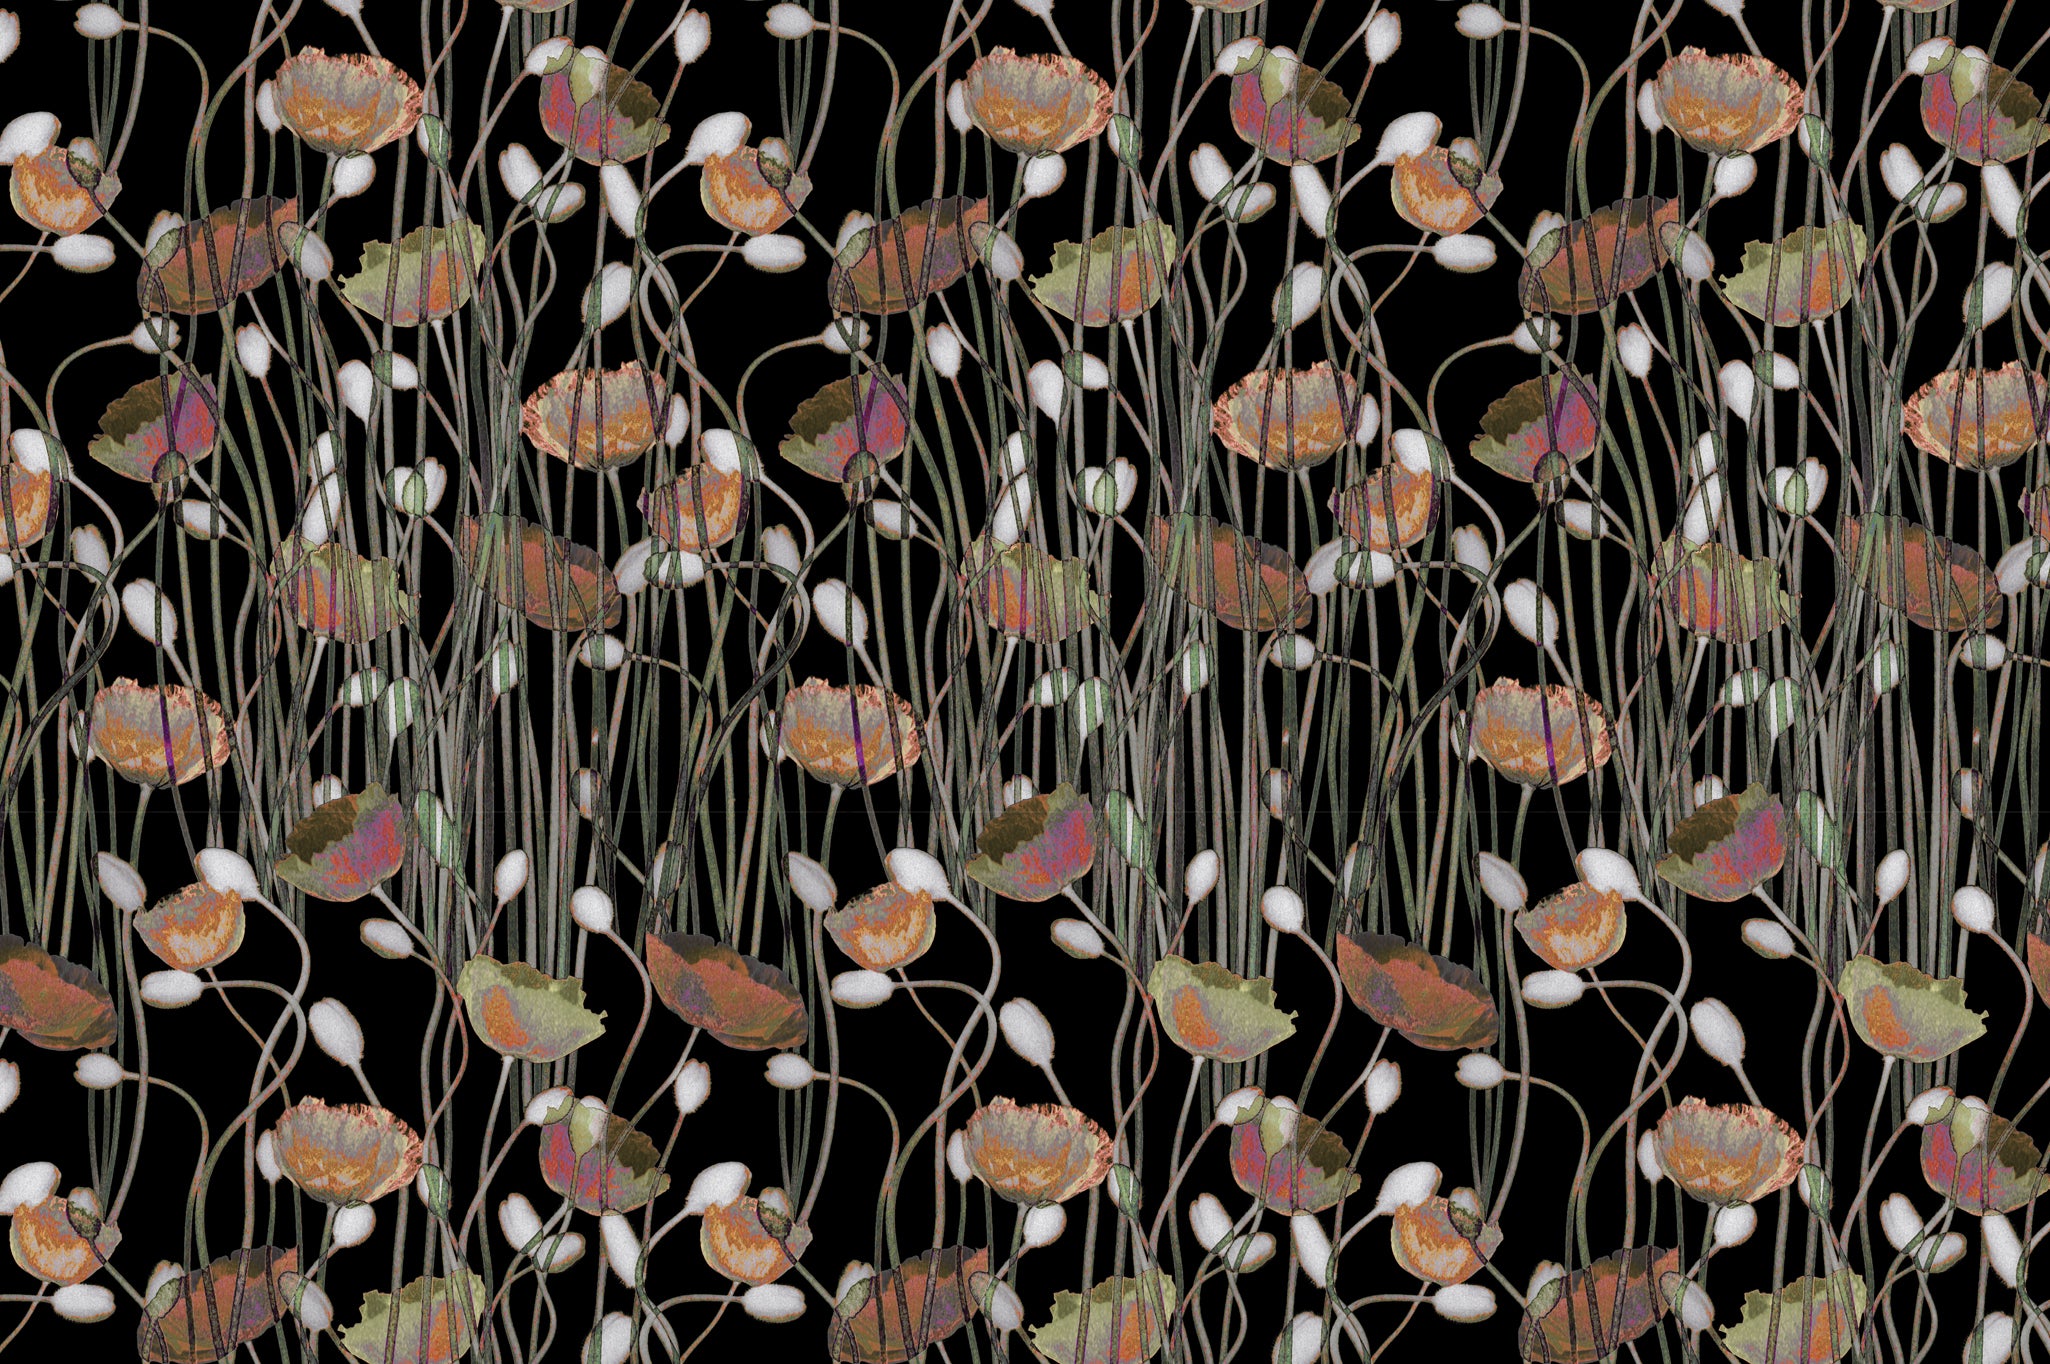 Detail of wallpaper in a dense poppy print in shades of red, white, orange and green on a black field.